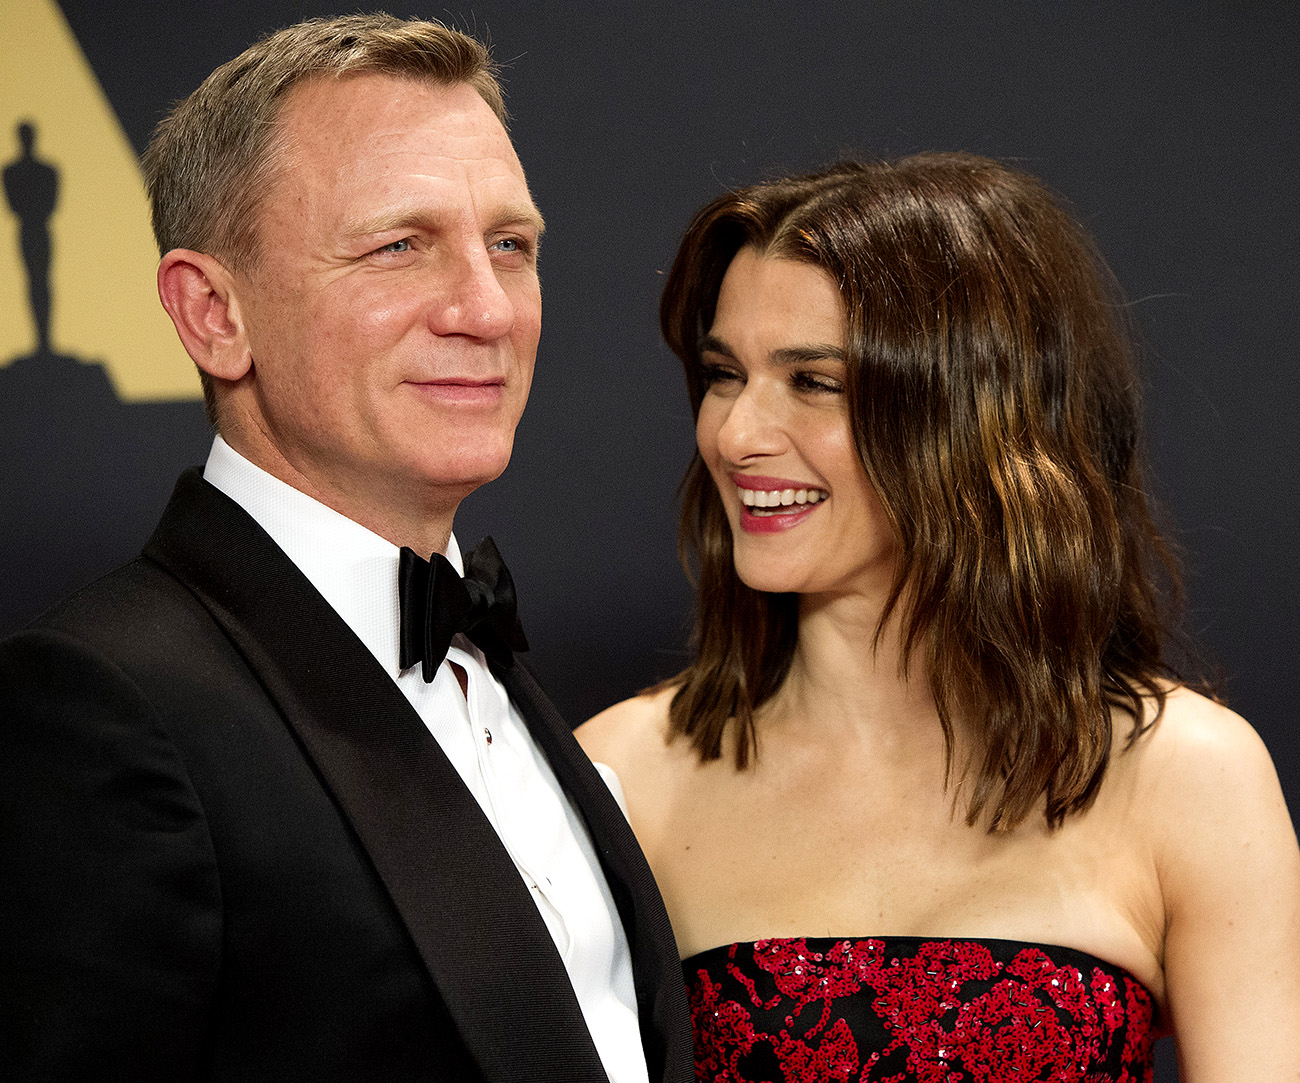 Rachel Weisz and husband Daniel Craig have welcomed their new baby